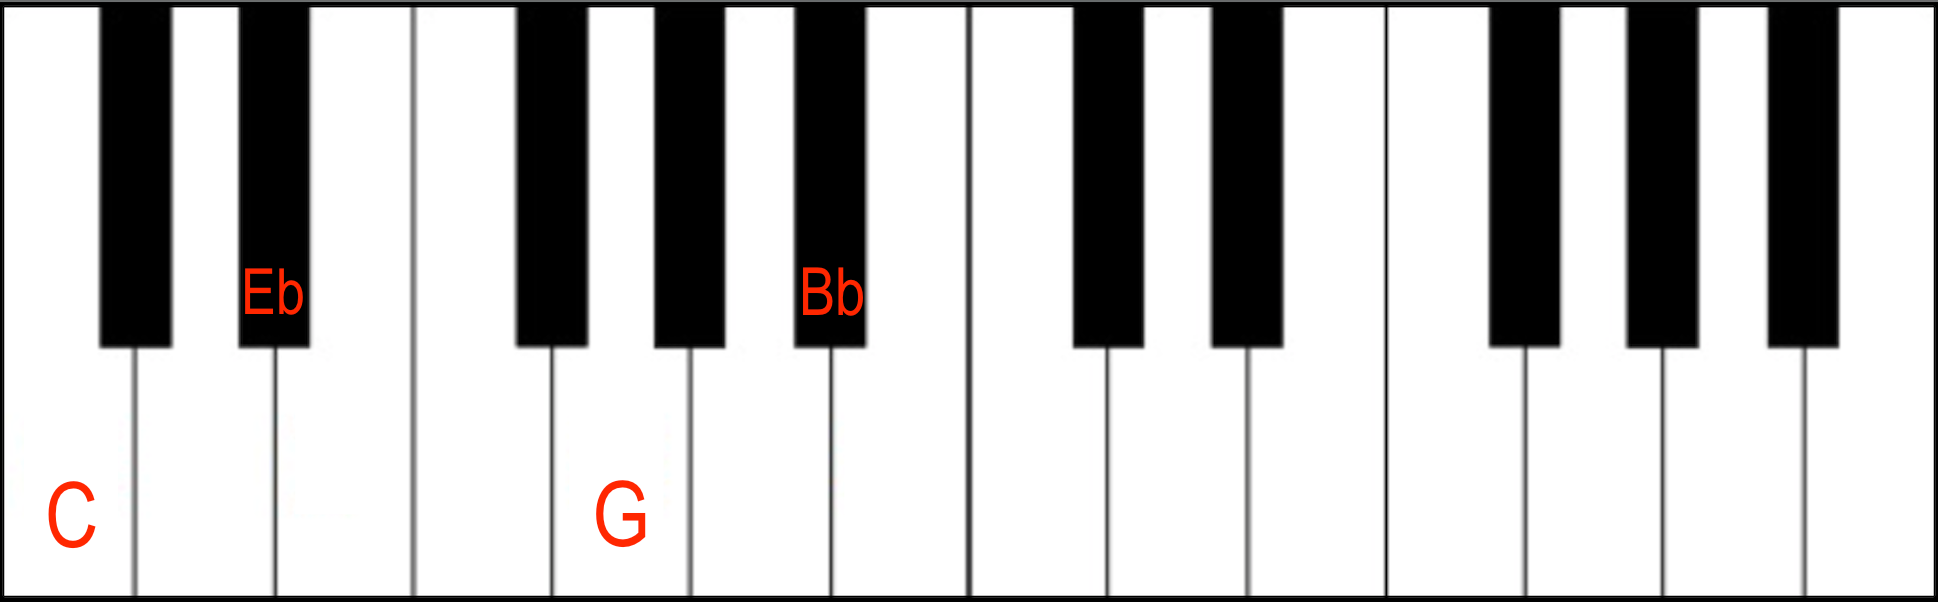 Piano chord chart: Cm7 in root position